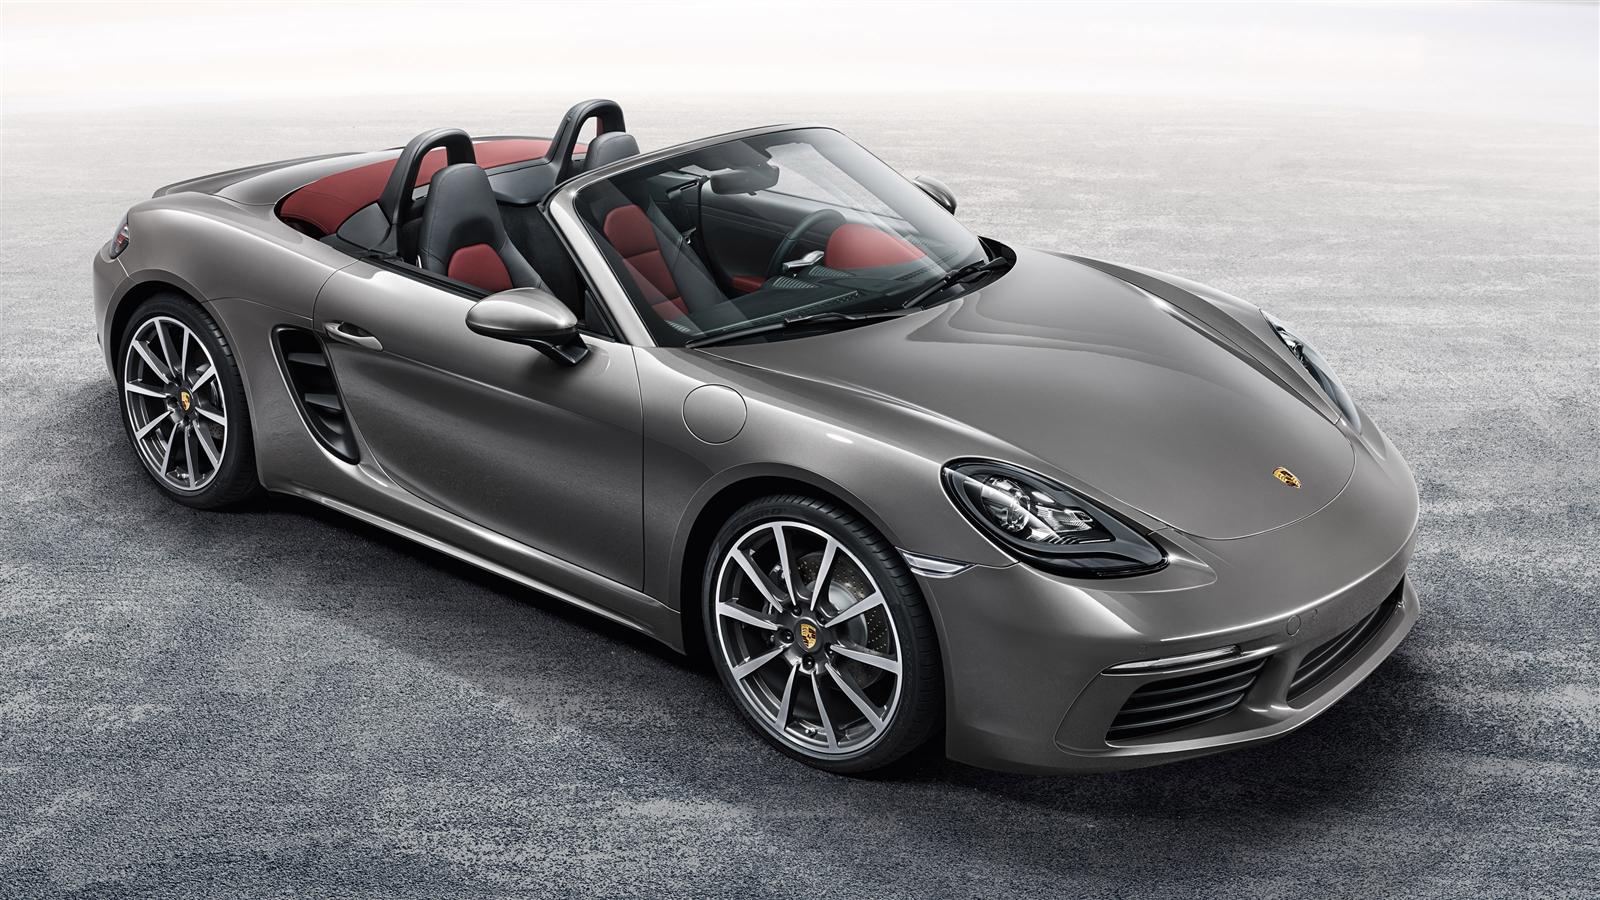 Great Porsche Boxster Wallpaper Full HD Pictures